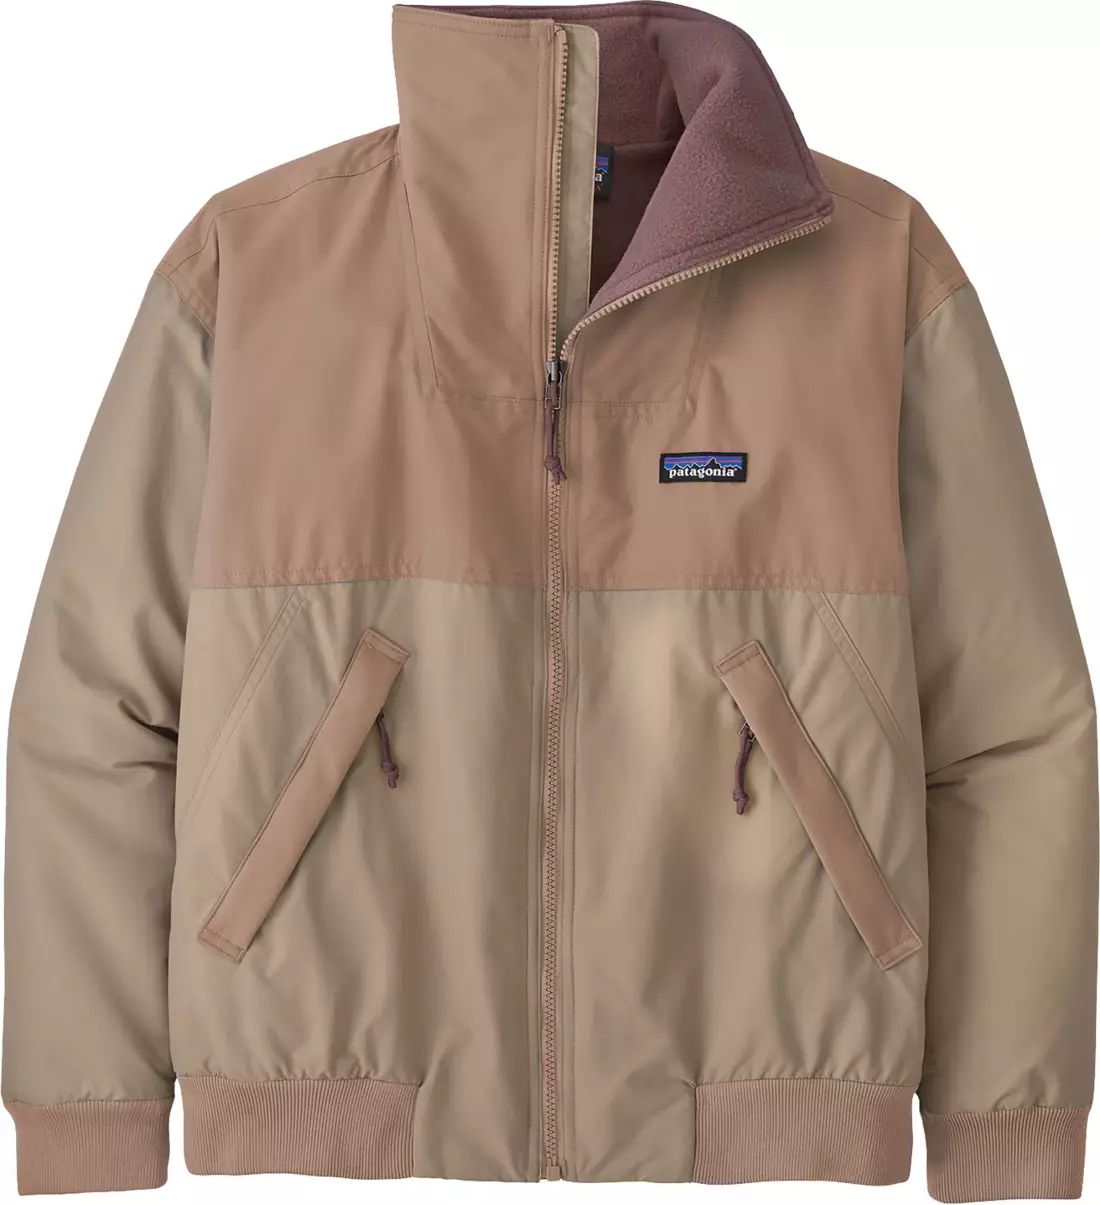 Patagonia Women's Shelled Synch Jacket | Dick's Sporting Goods